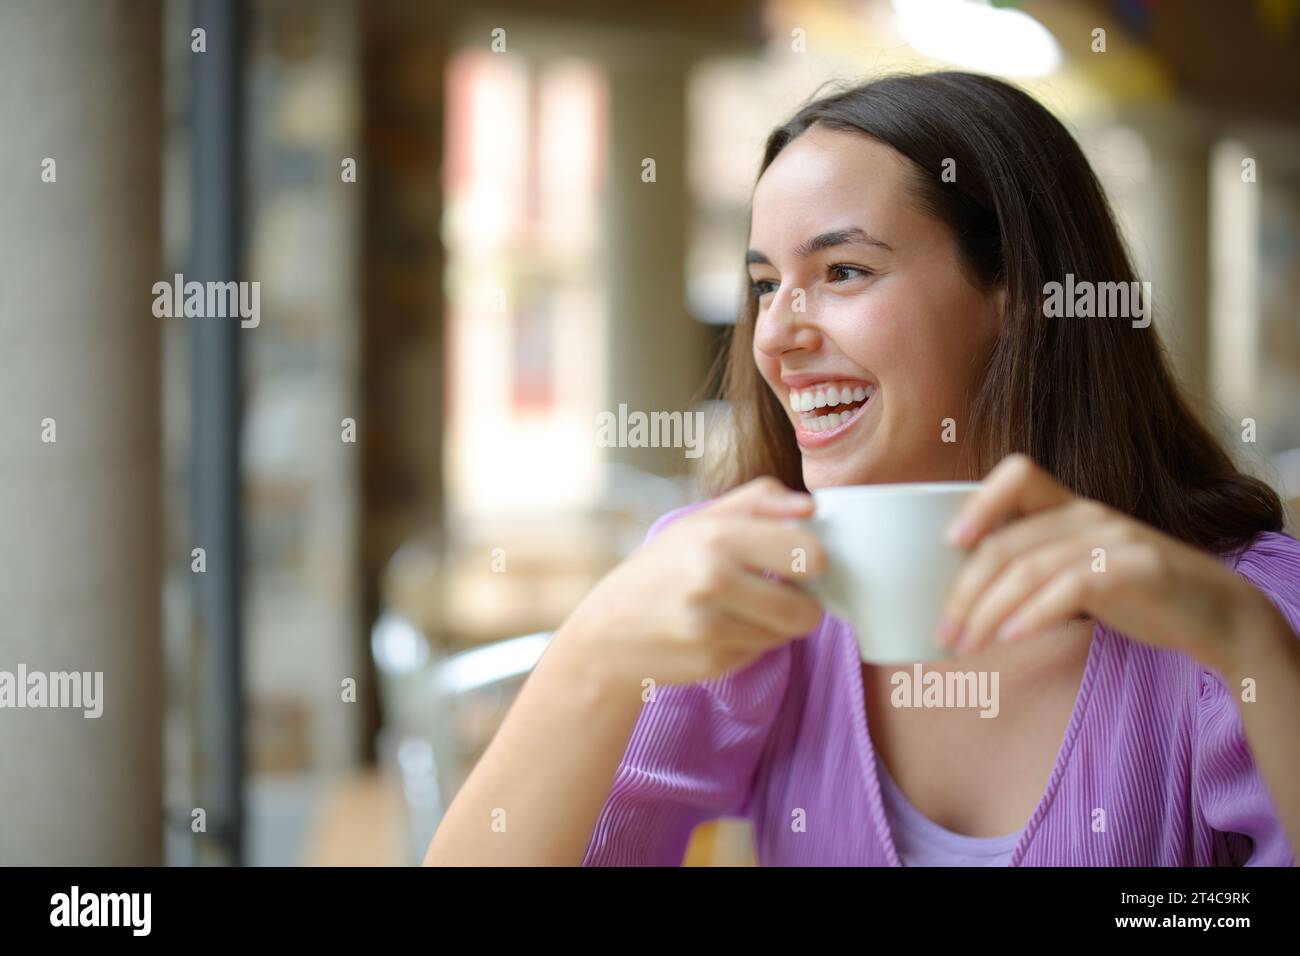 Happy woman at breakfast drinking coffee laughing looking at side Stock Photo